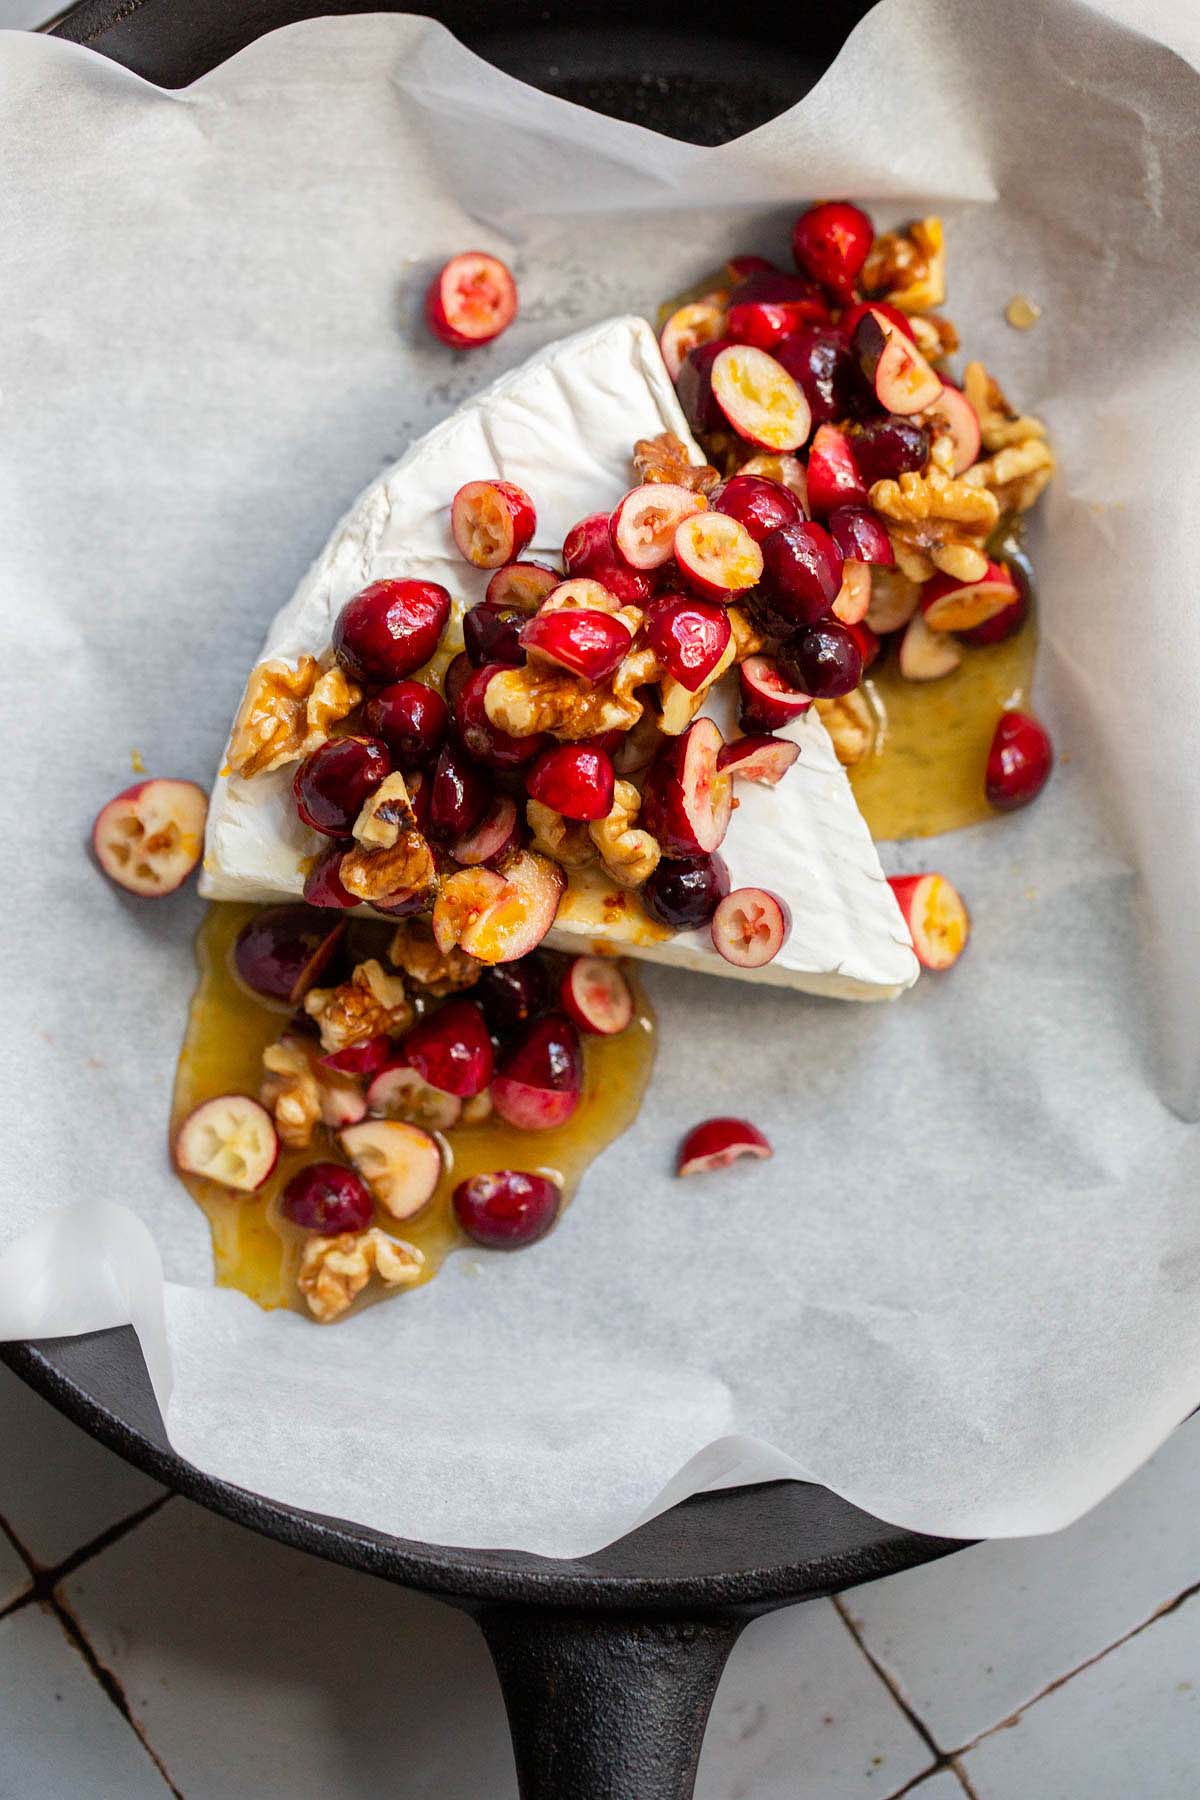 Uncooked brie wedge topped with cranberries and walnuts.